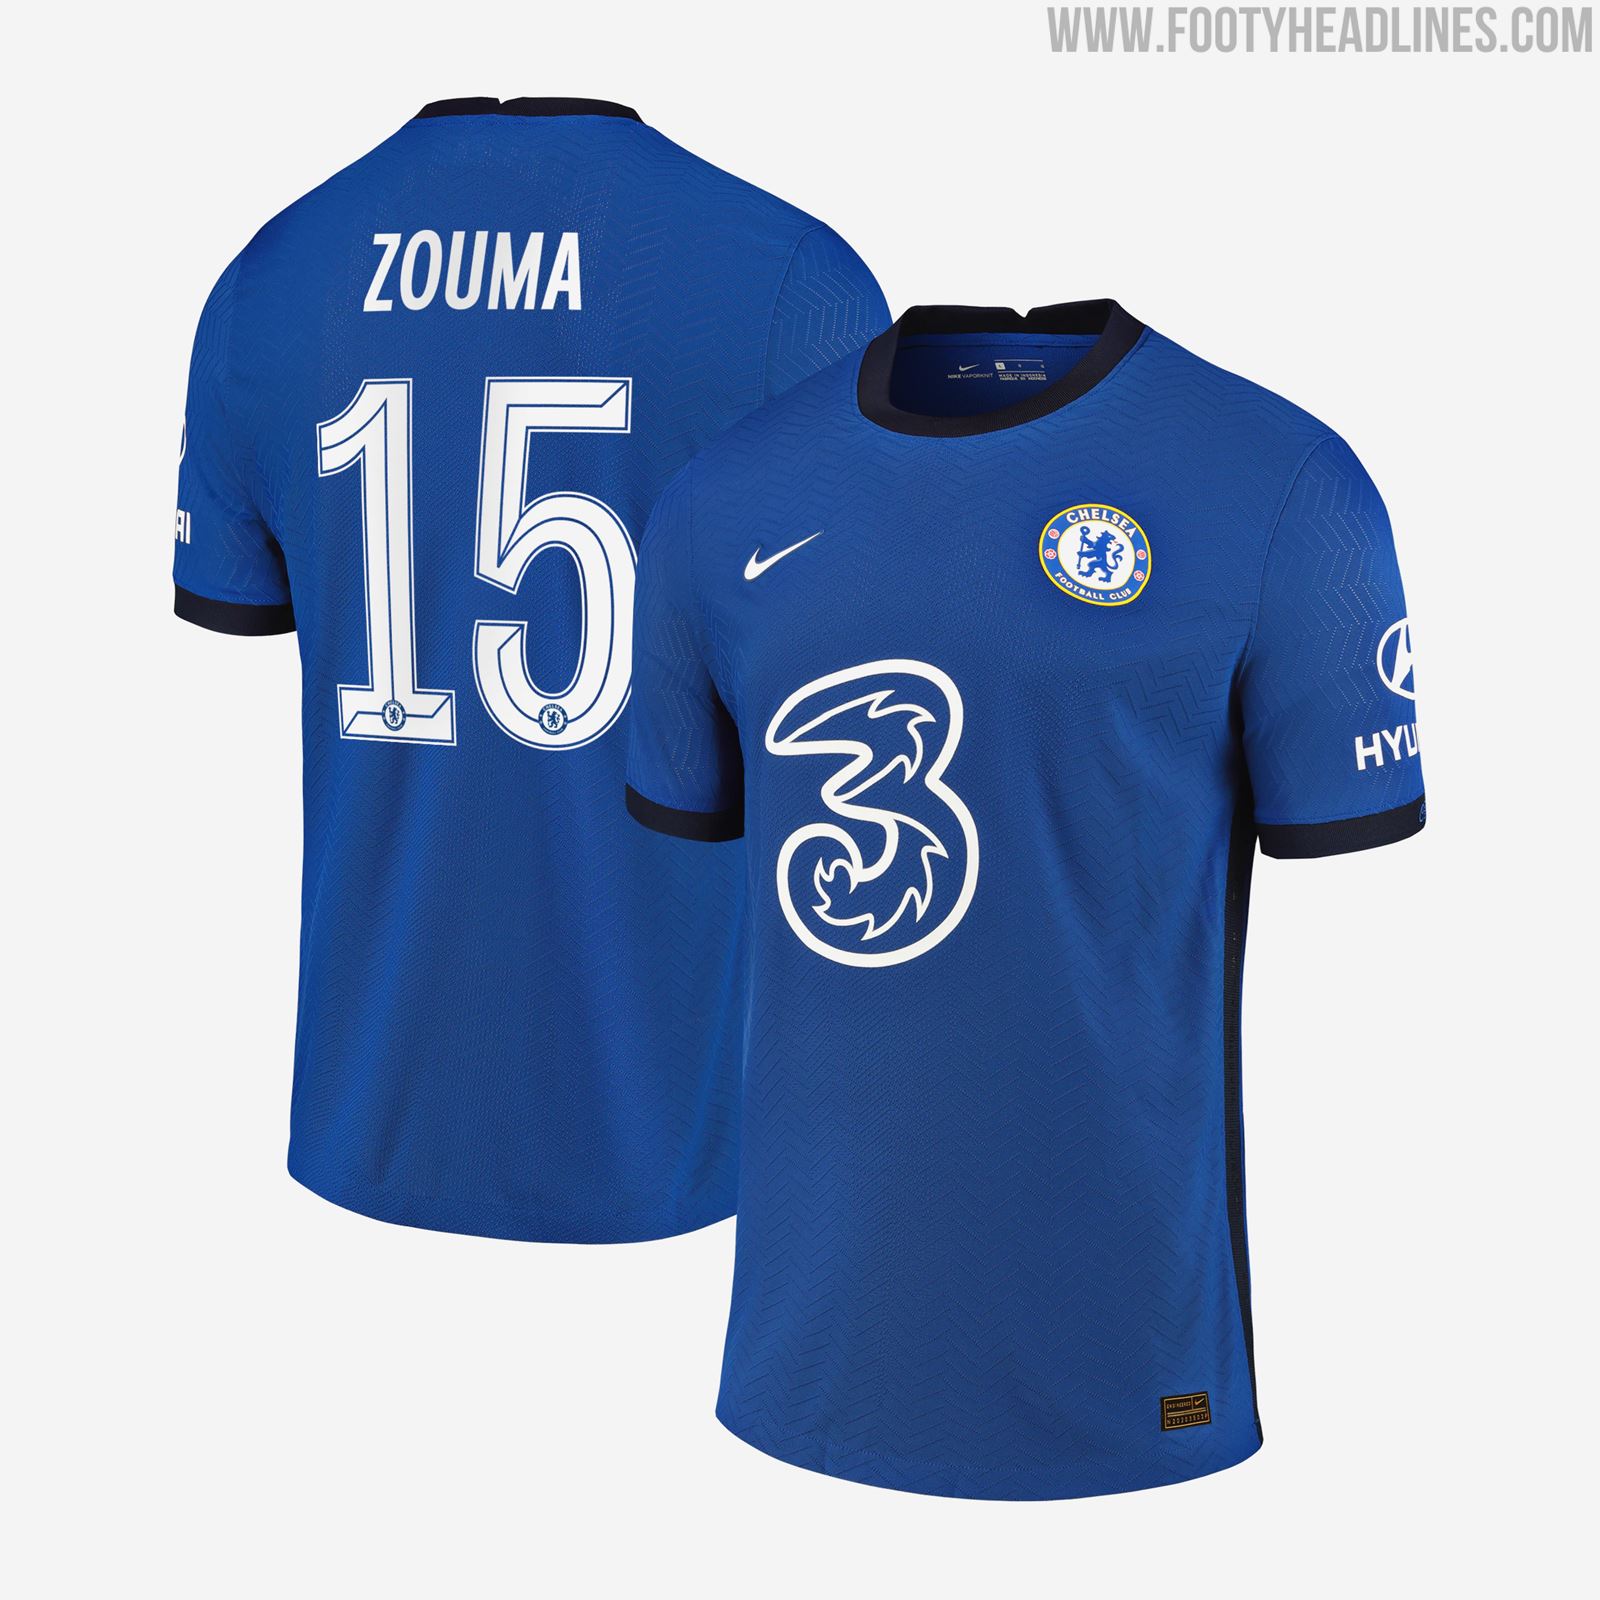 Chelsea To Keep 'Old' Kit Font For 2020-21 Season - Footy Headlines